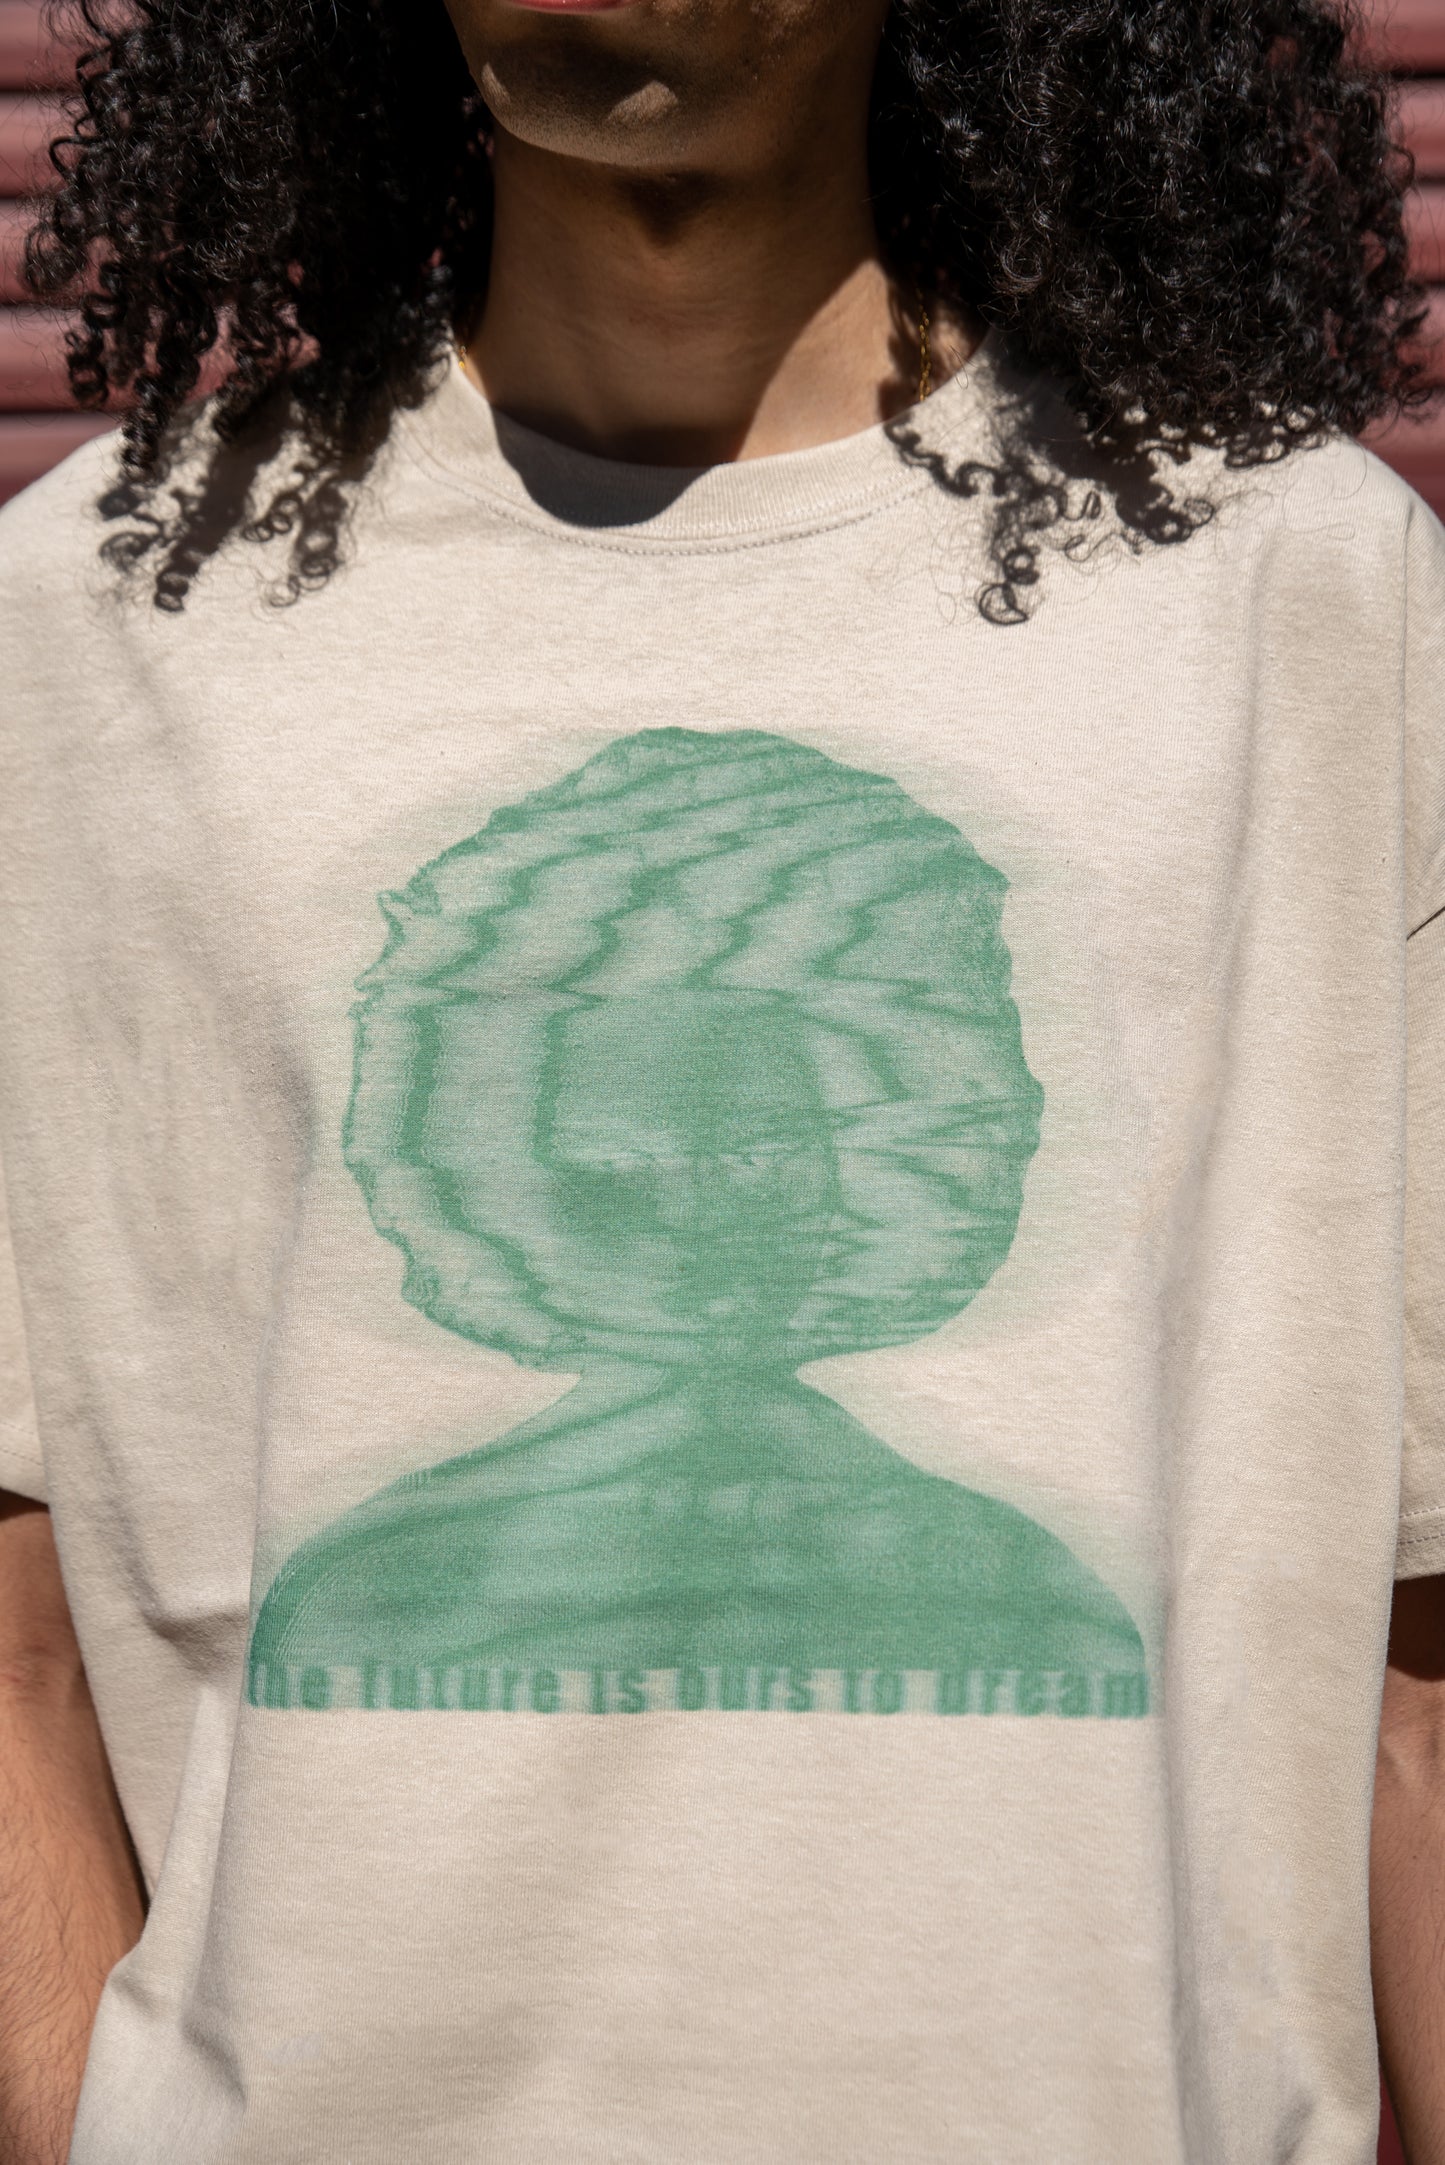 Short-Sleeved T-shirt in Sand with The Future Is Ours To Dream Print